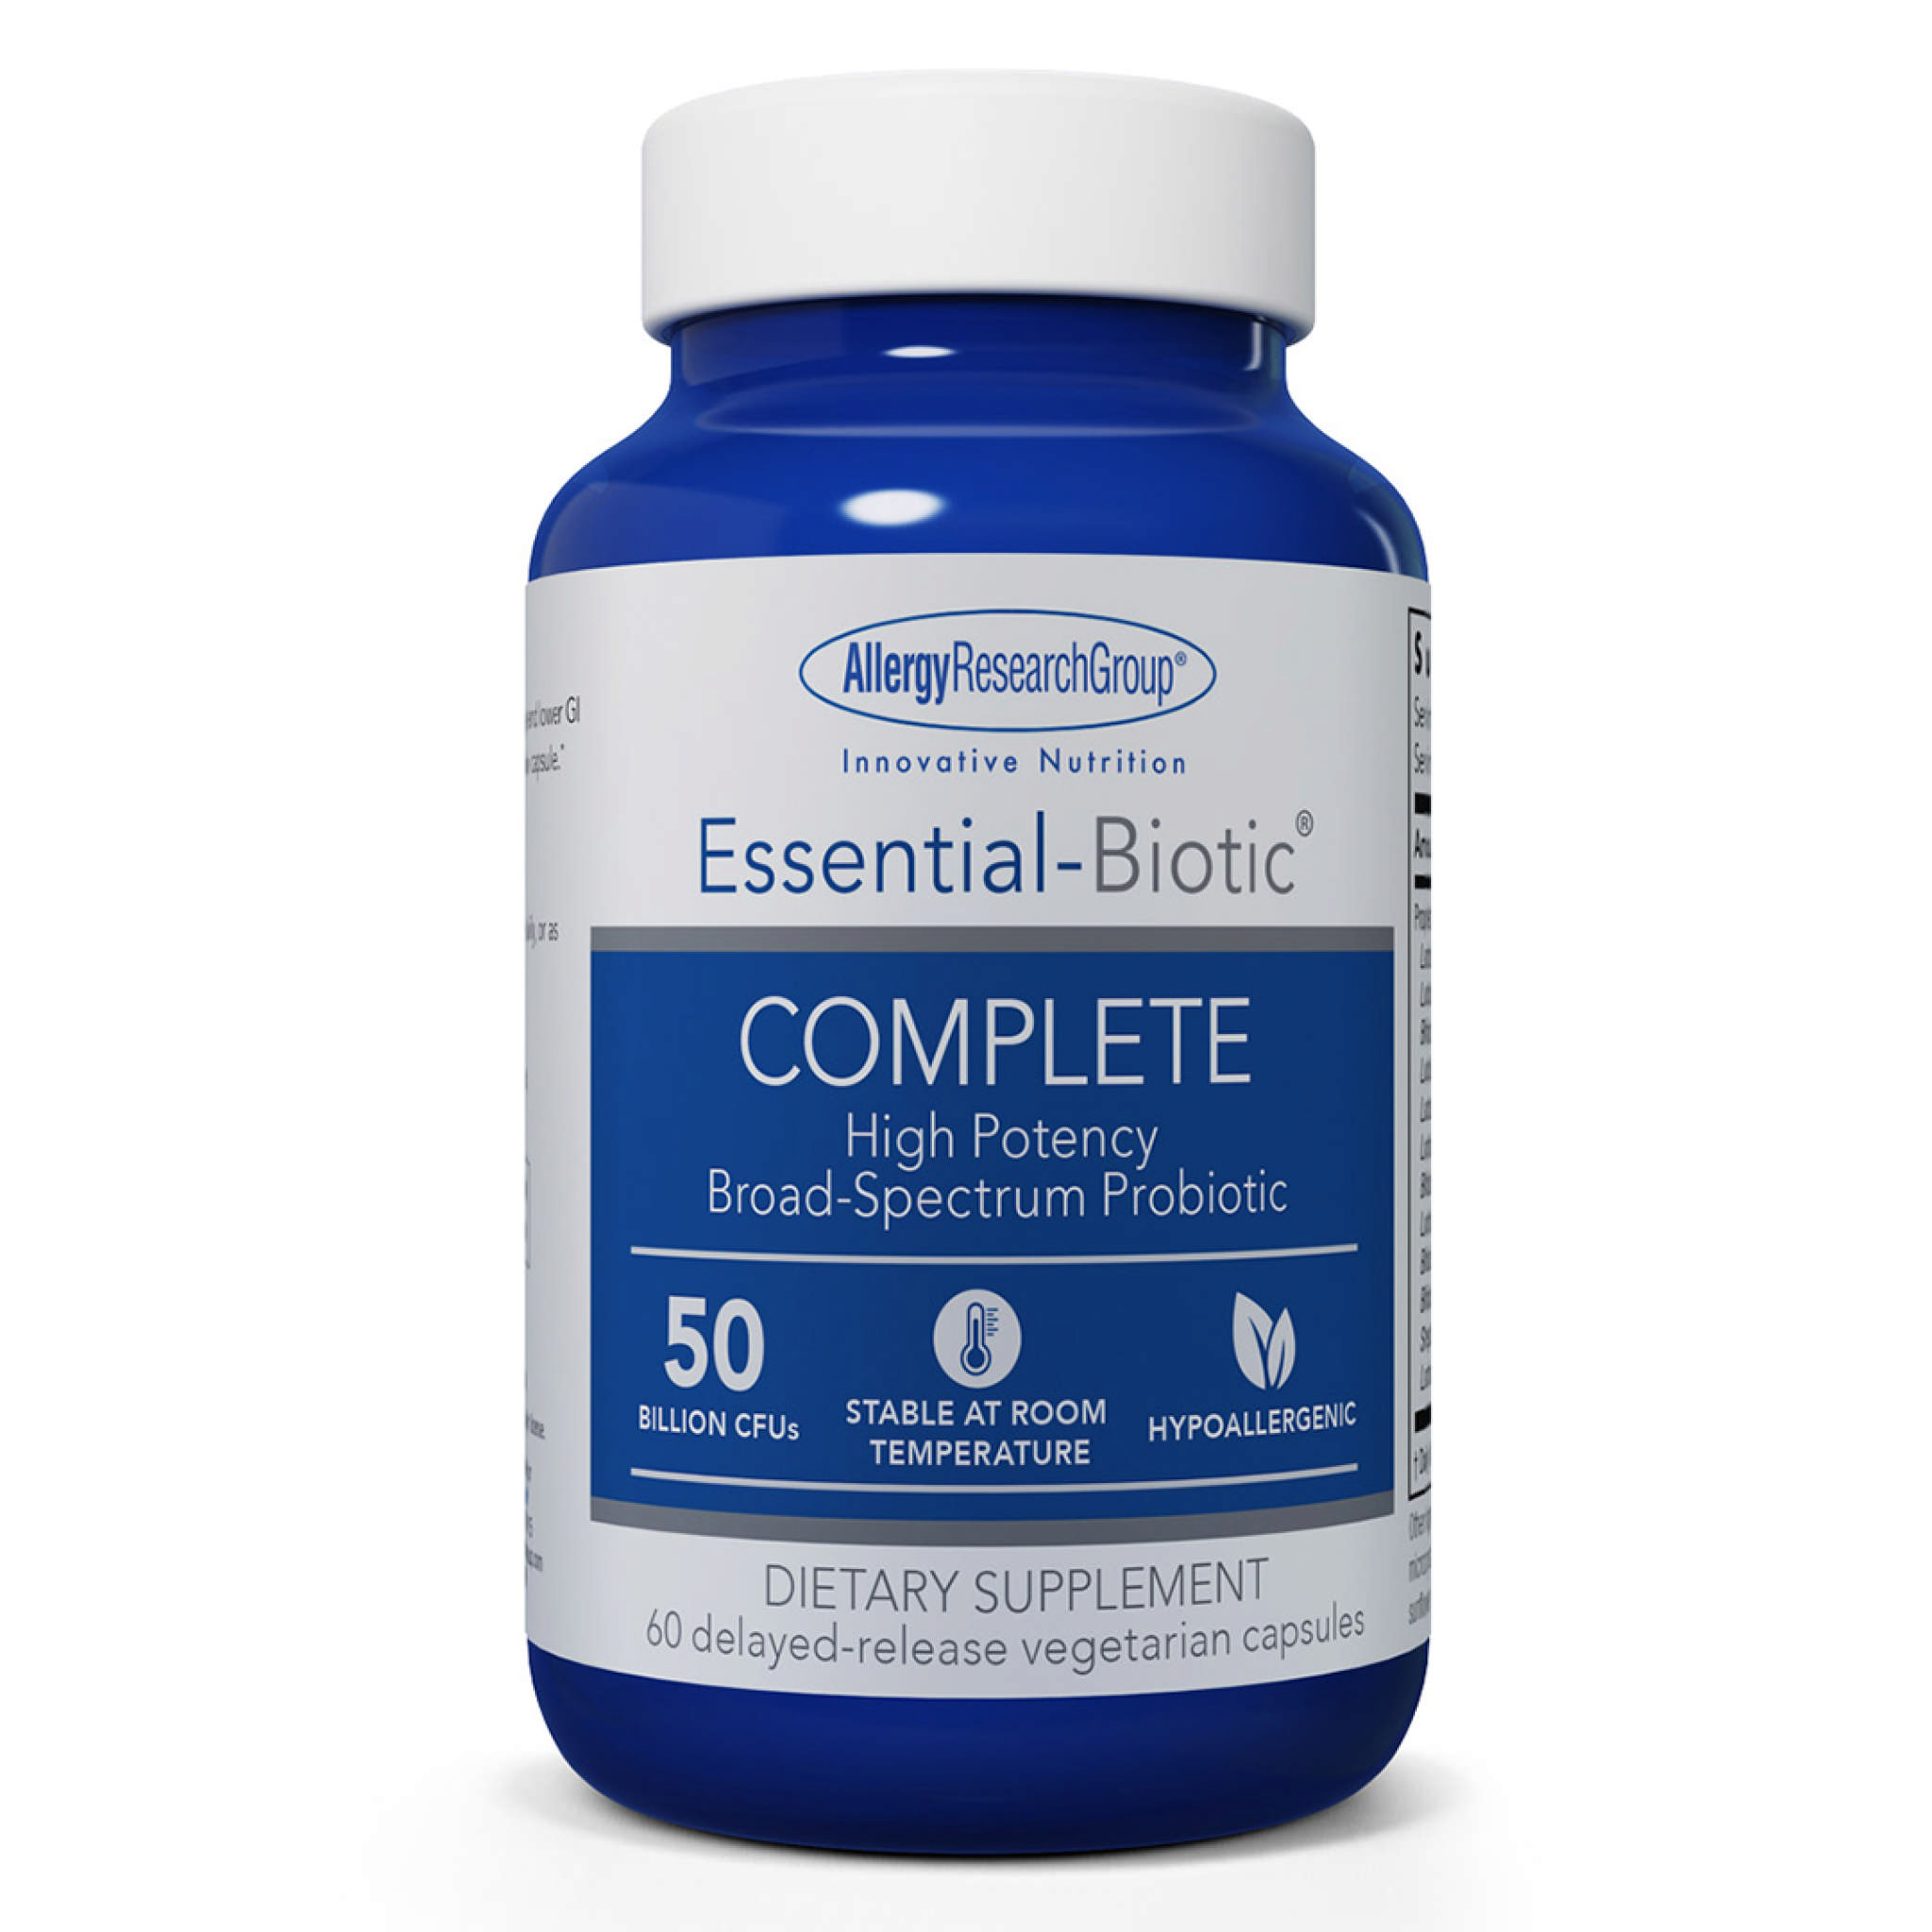 Allergy Research Group - Complete Essent Biotic 50b